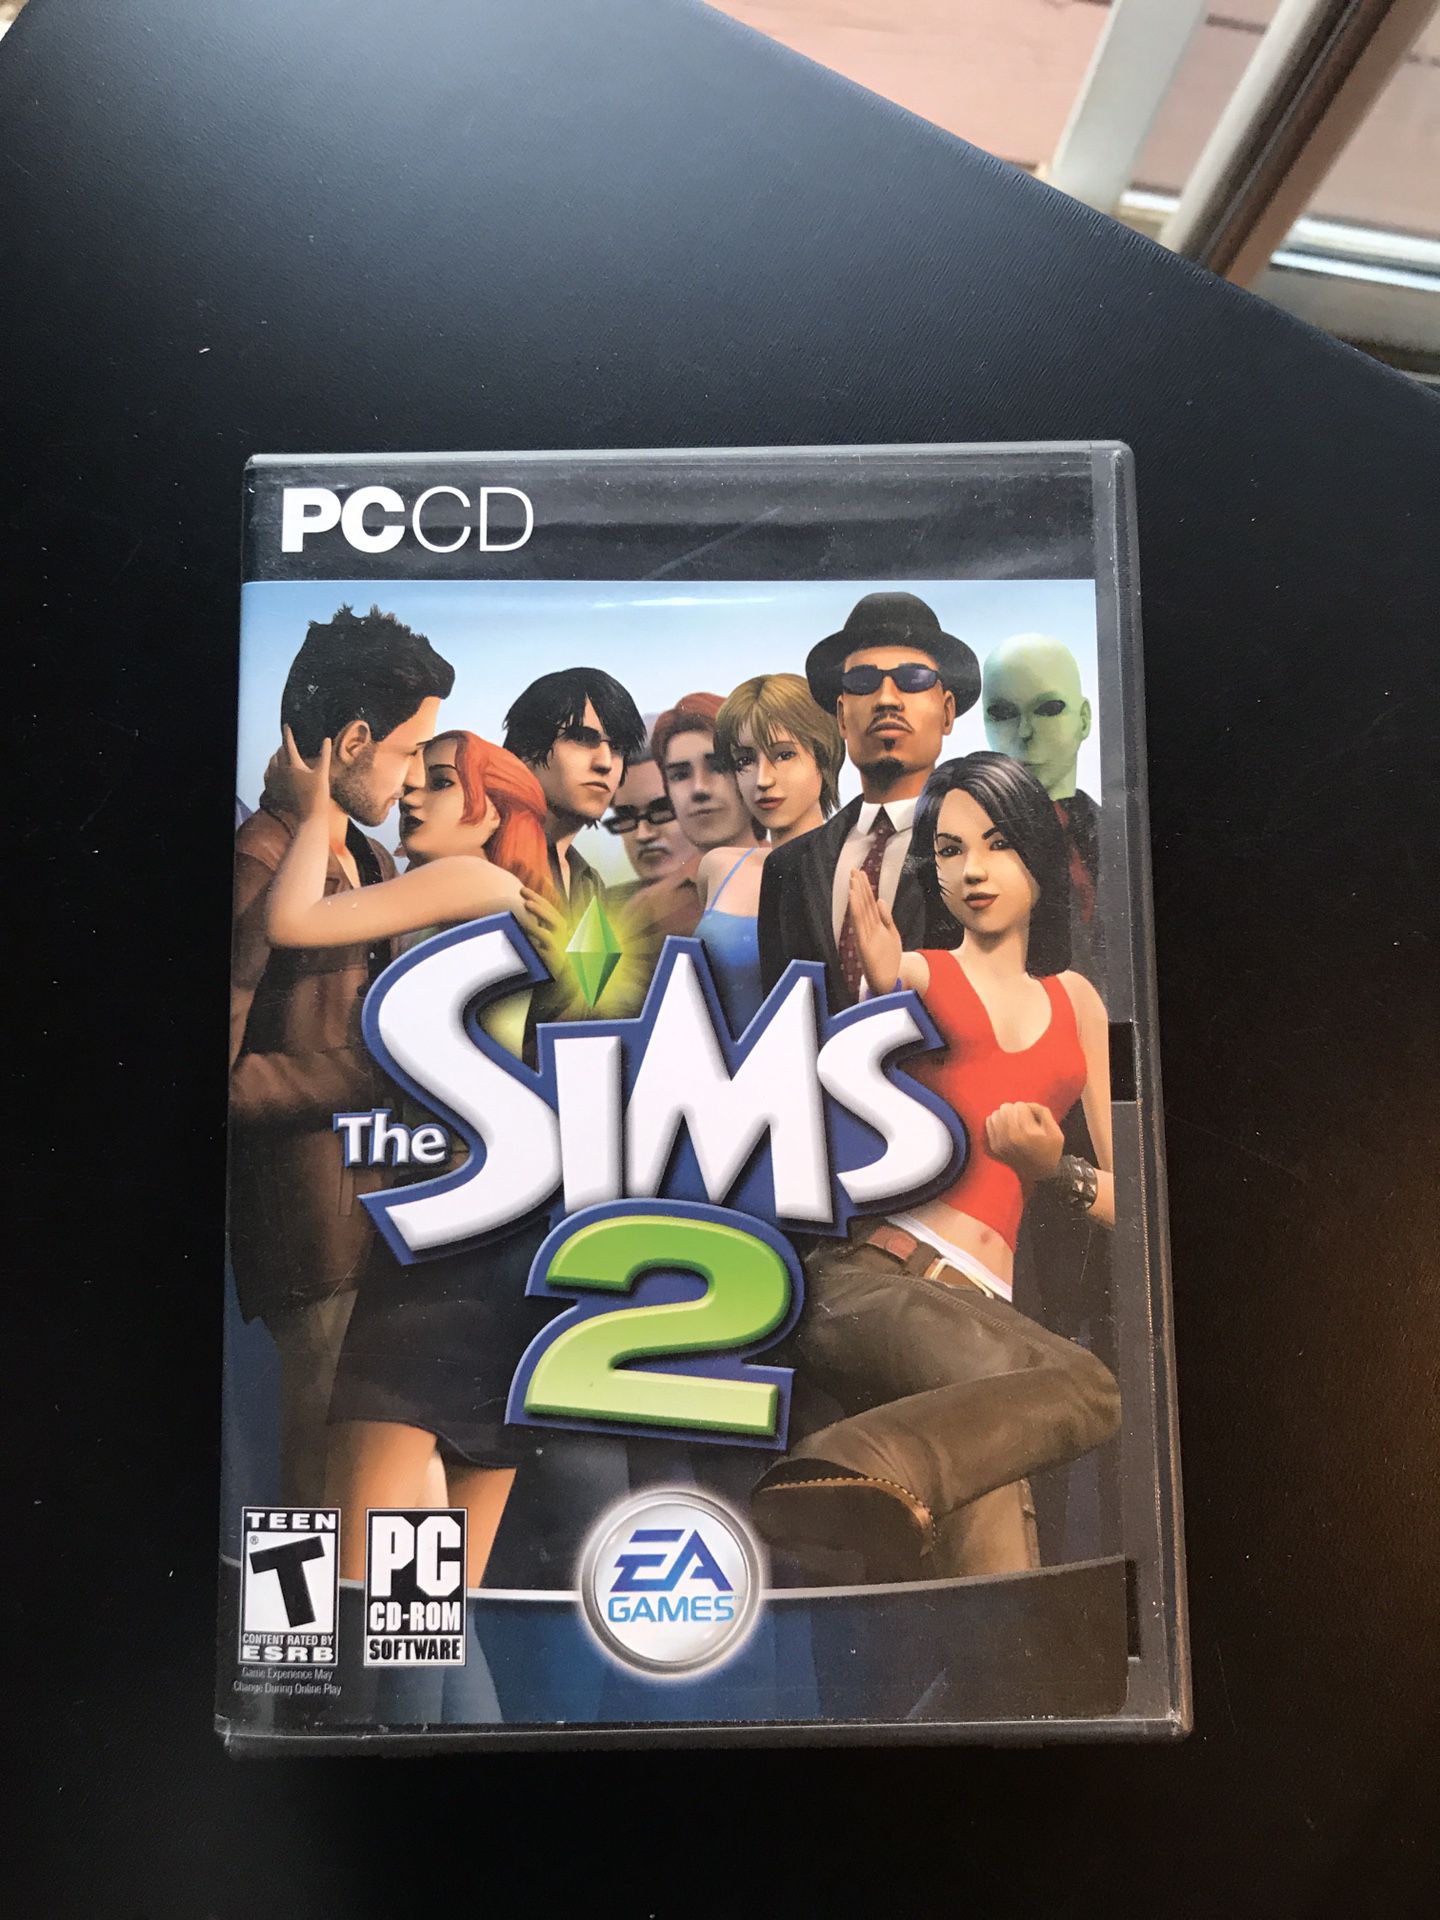 Sims 2 and Sims 2 Open for Business Expansion - PC Computer Game